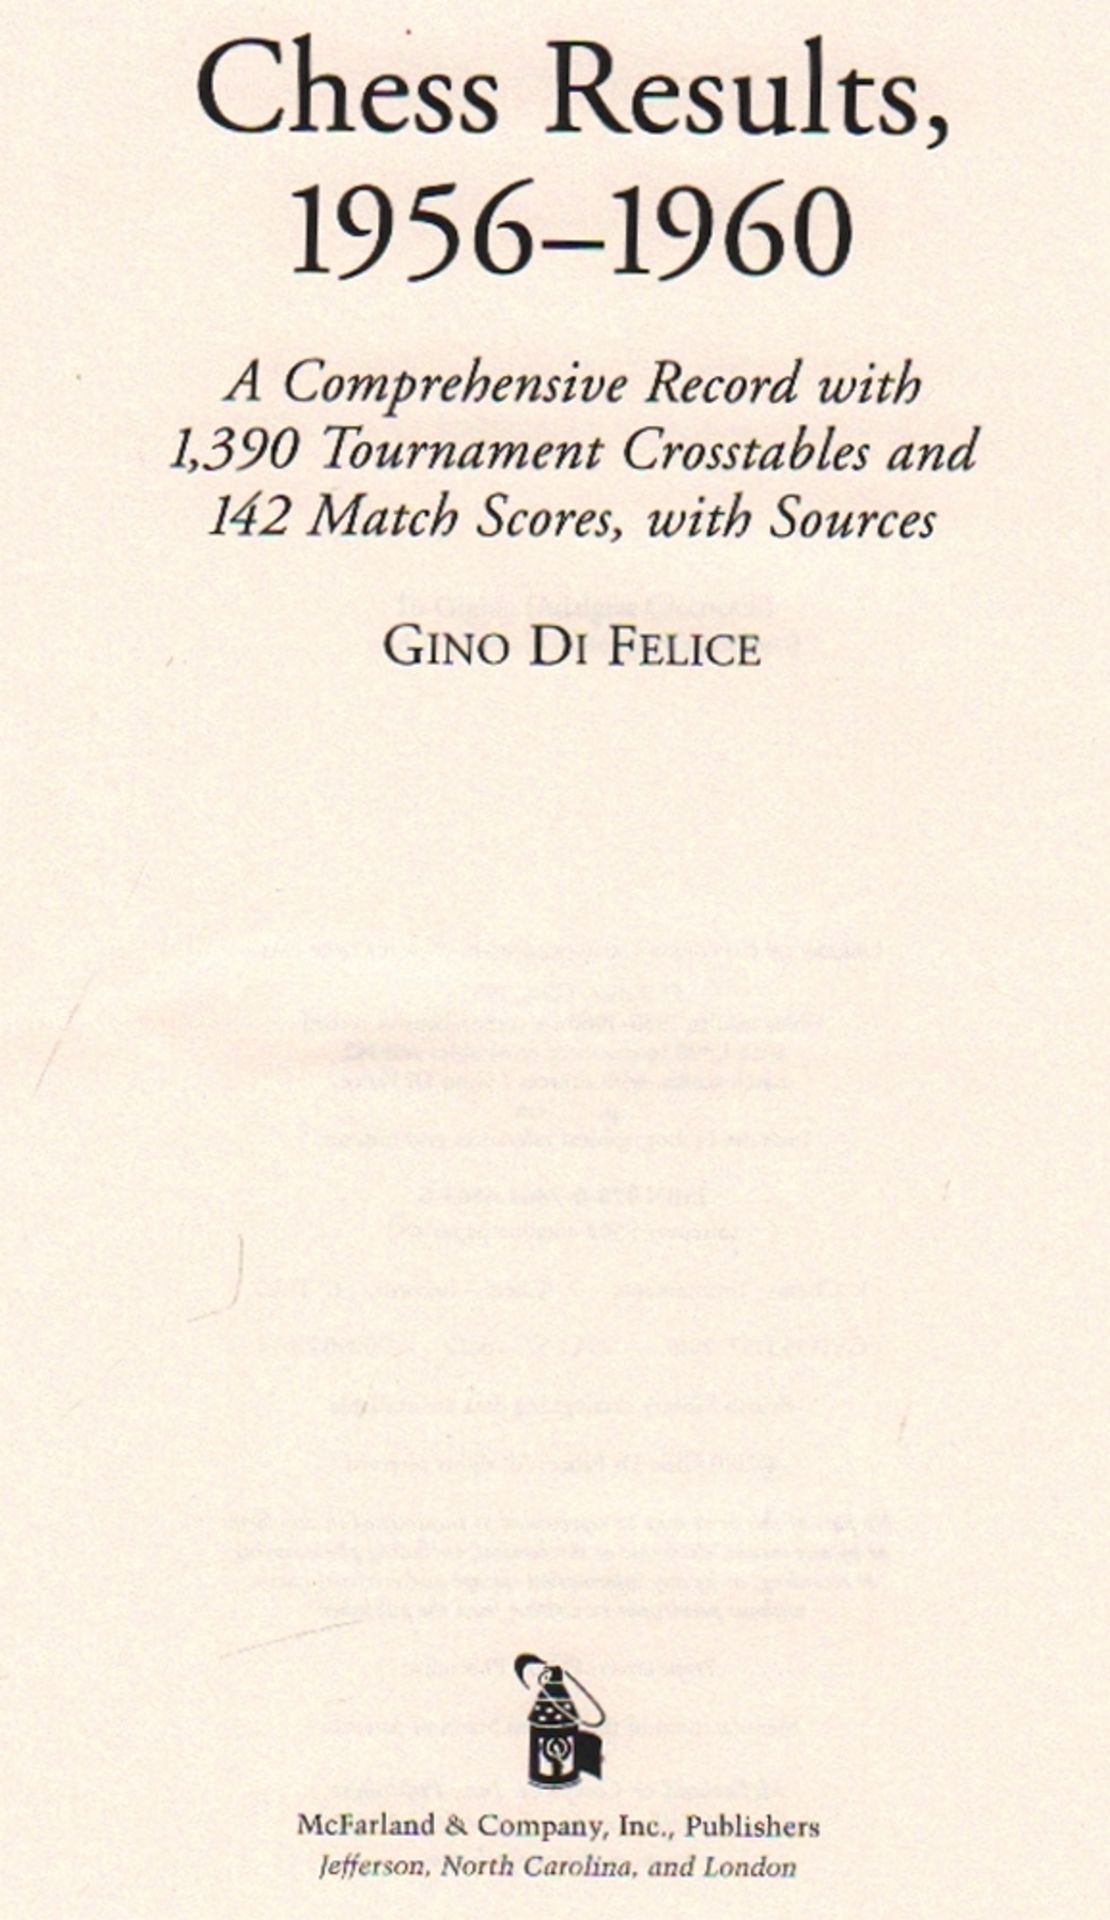 Di Felice, Gino. Chess Results, 1956 - 1960. A Comprehensive Record with 1390 Tournament Crosstables